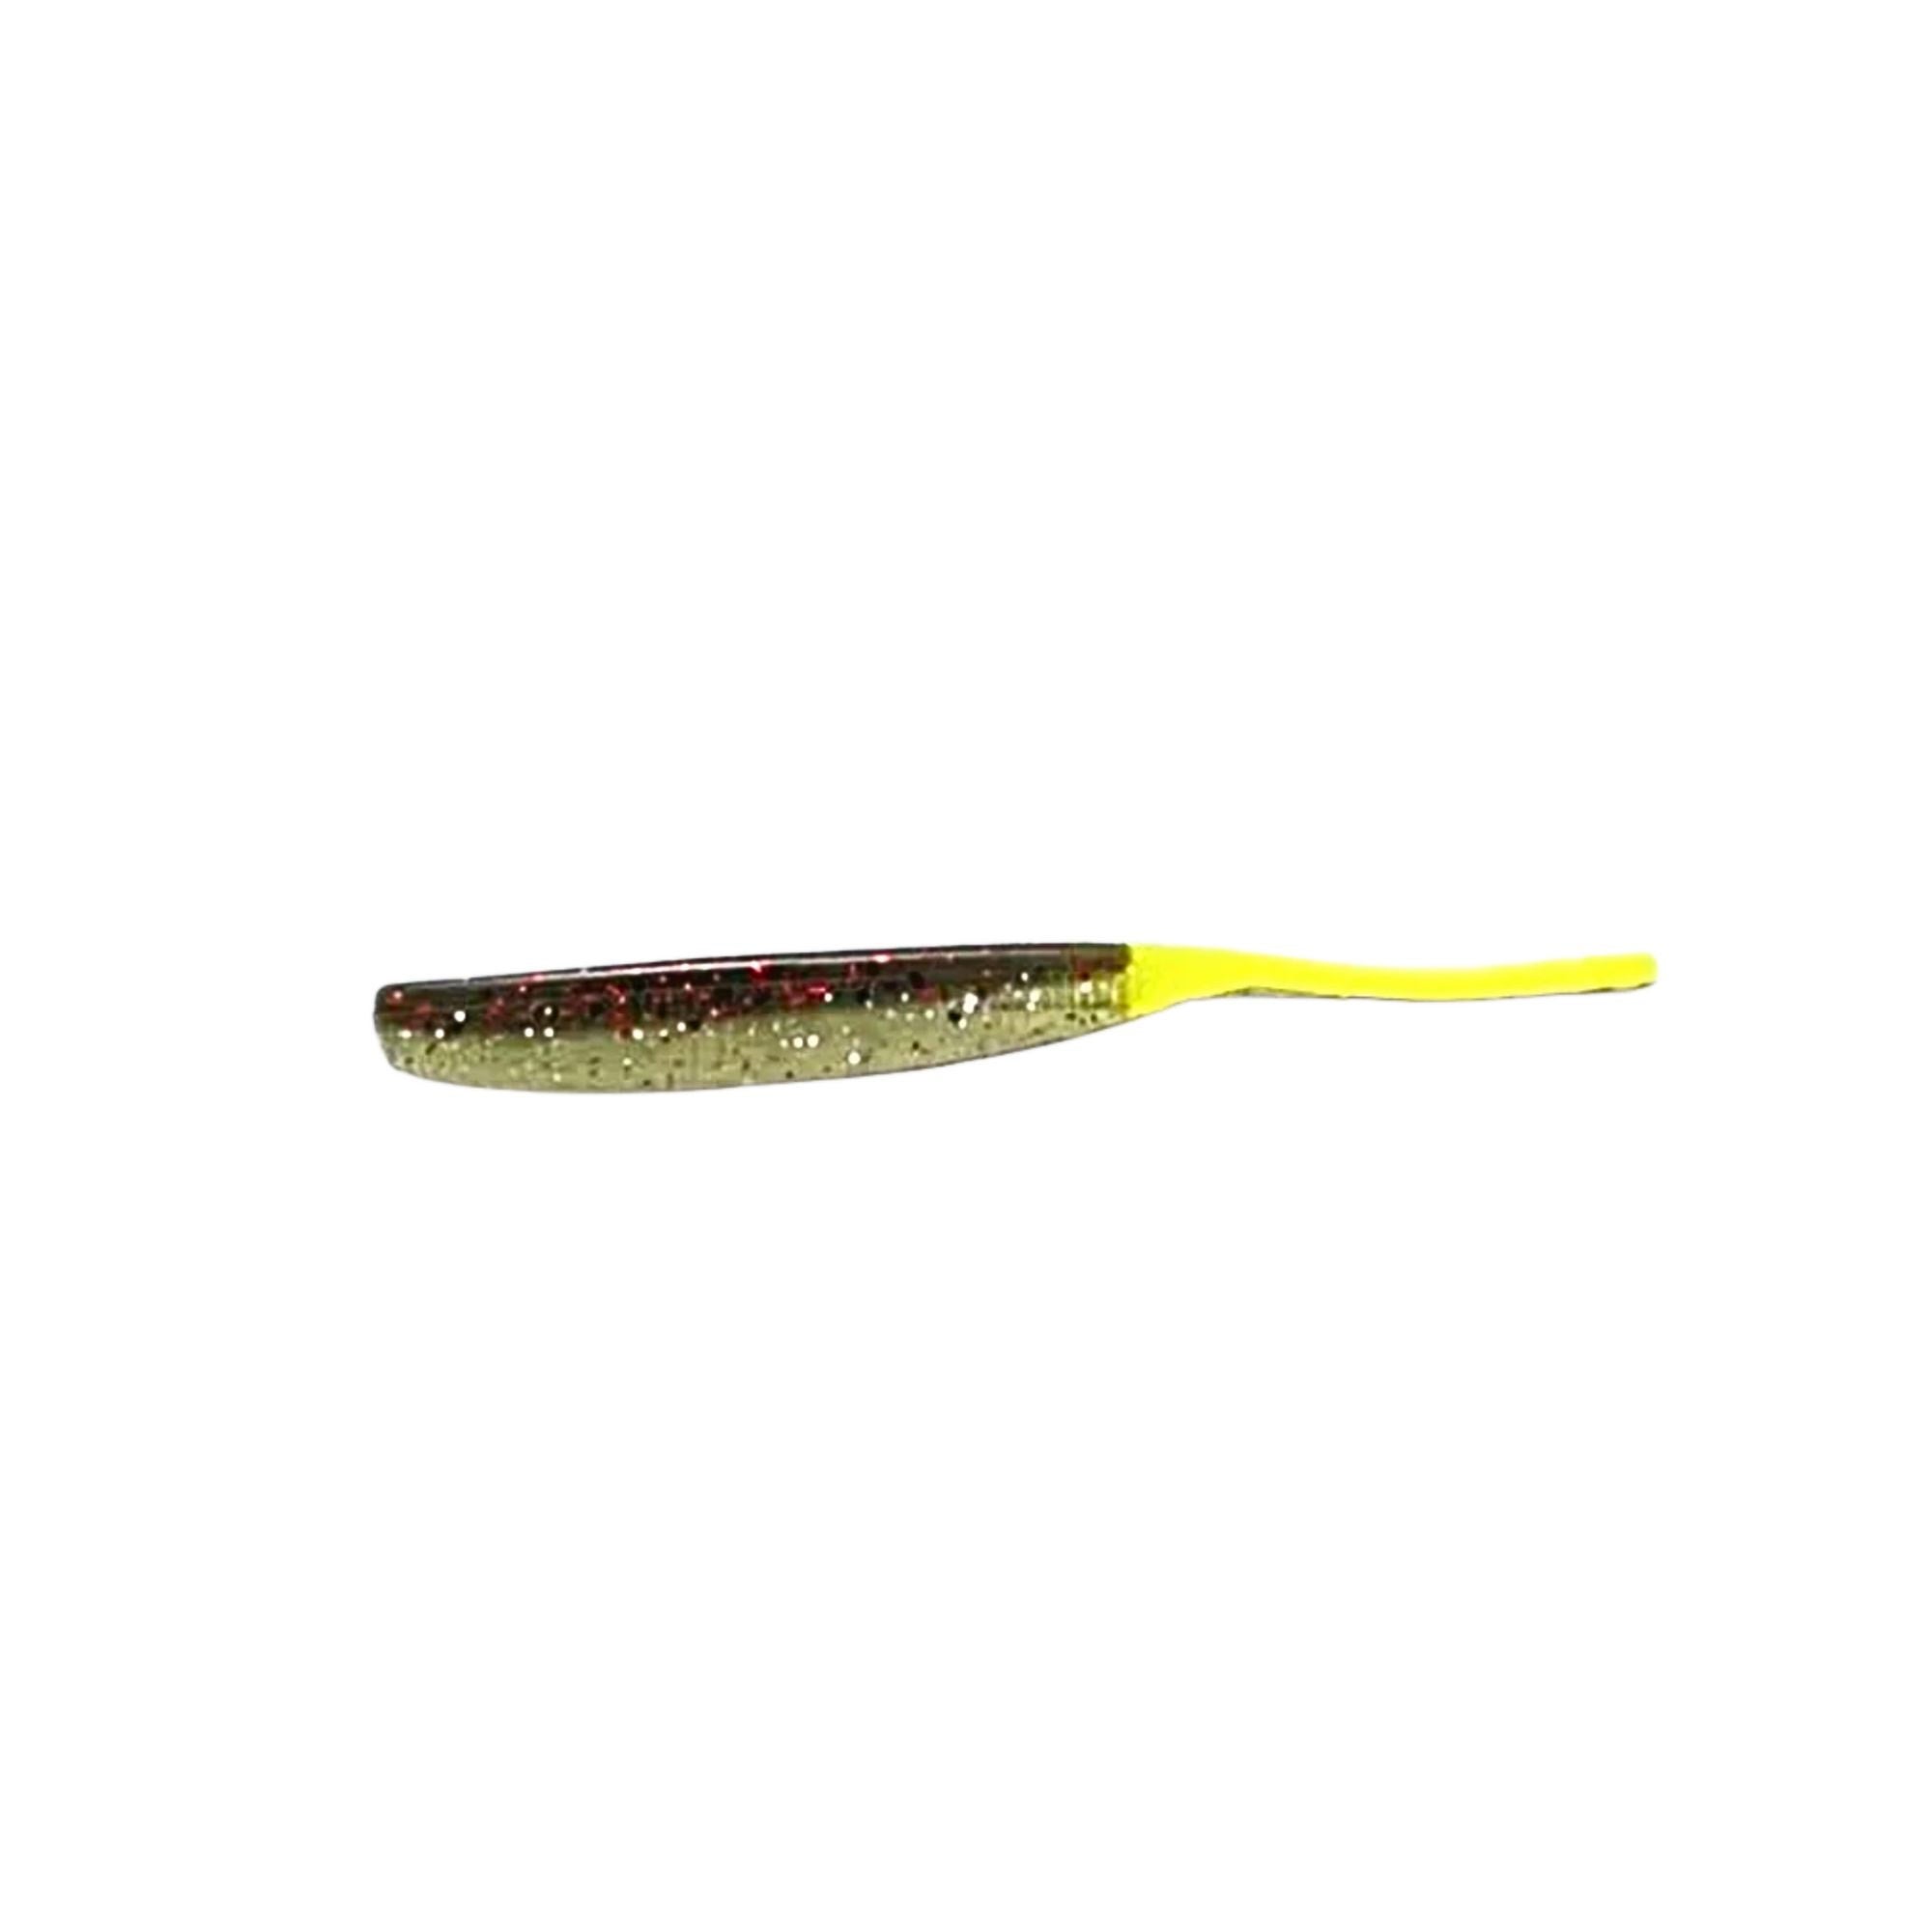 Ghost Minnows, Captain Lane, Lures, Baits, Tackle, Fishing Store